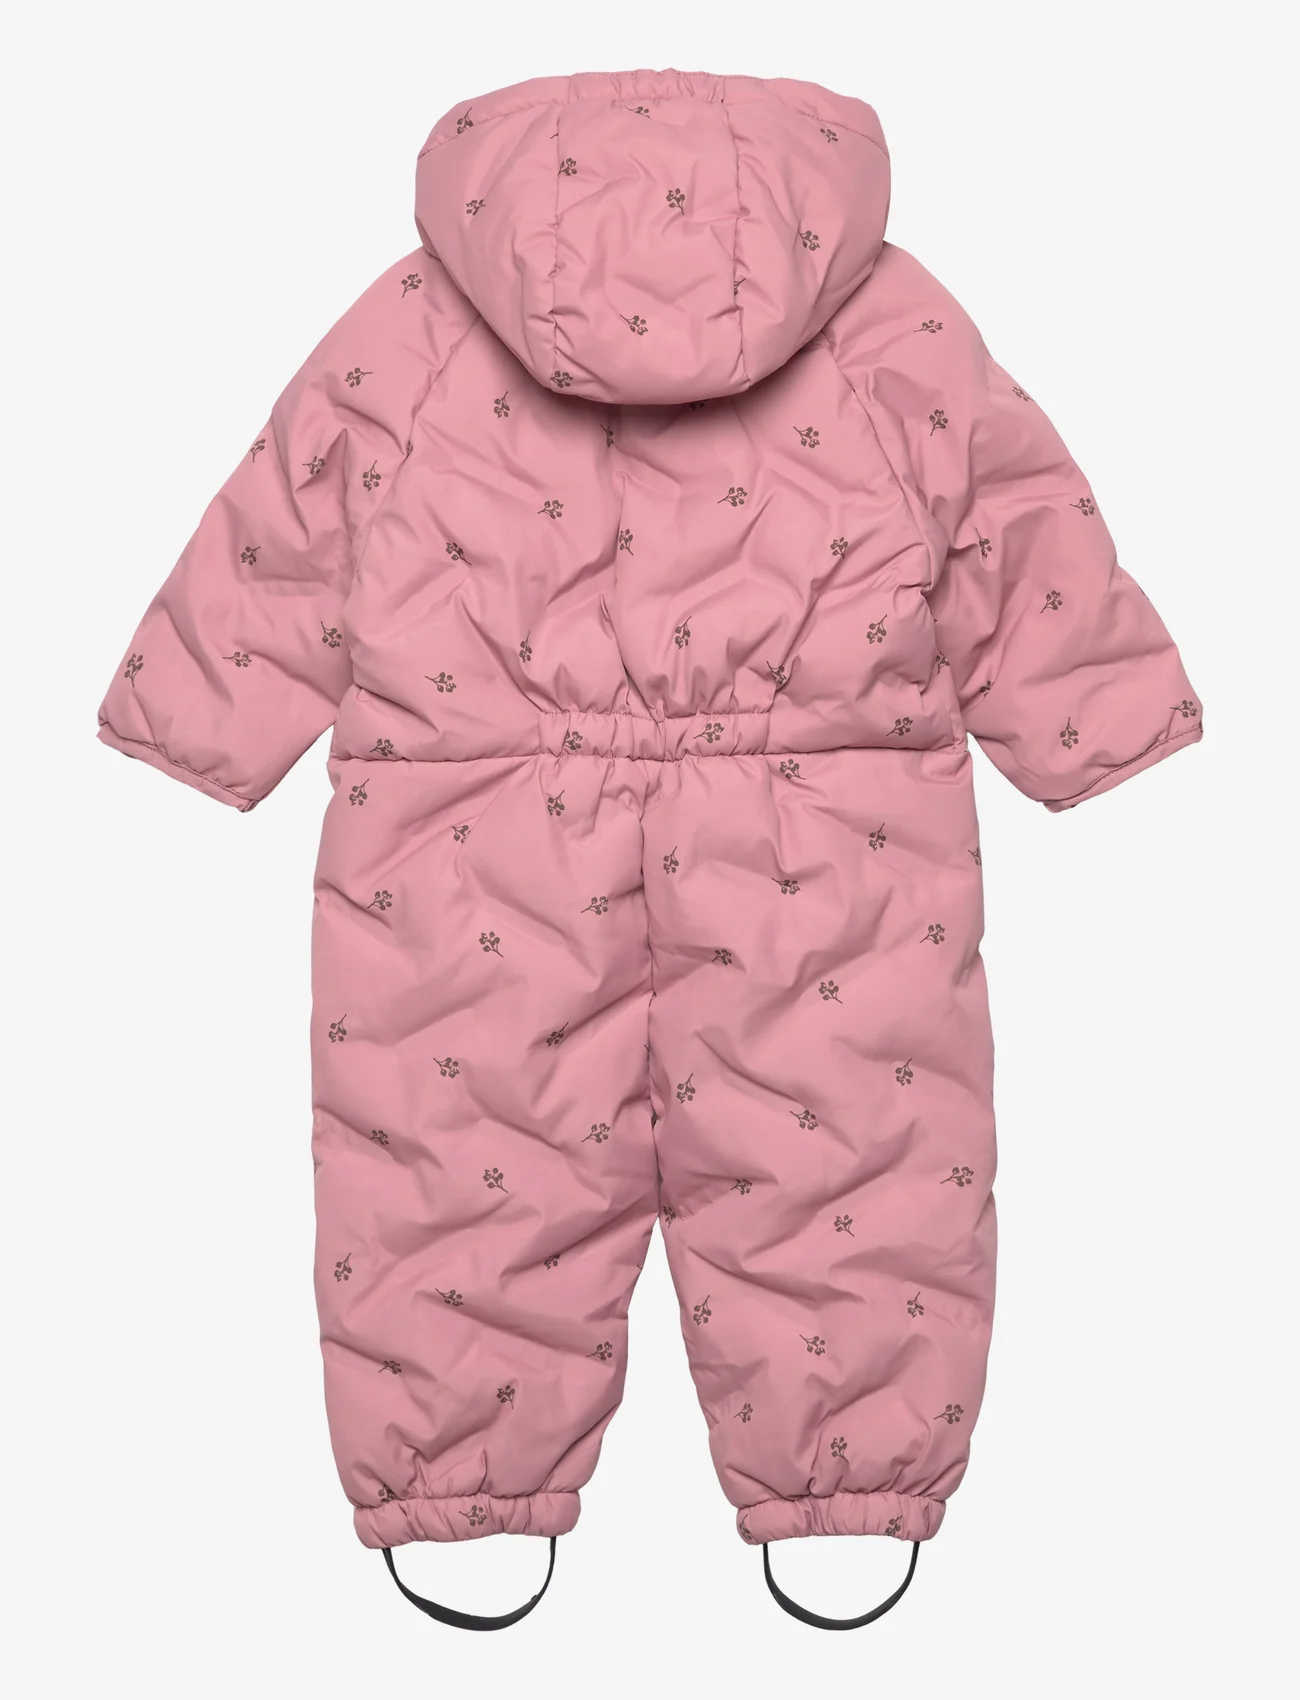 Minymo - Suit quilted AOP - schneeanzug - ash rose - 1